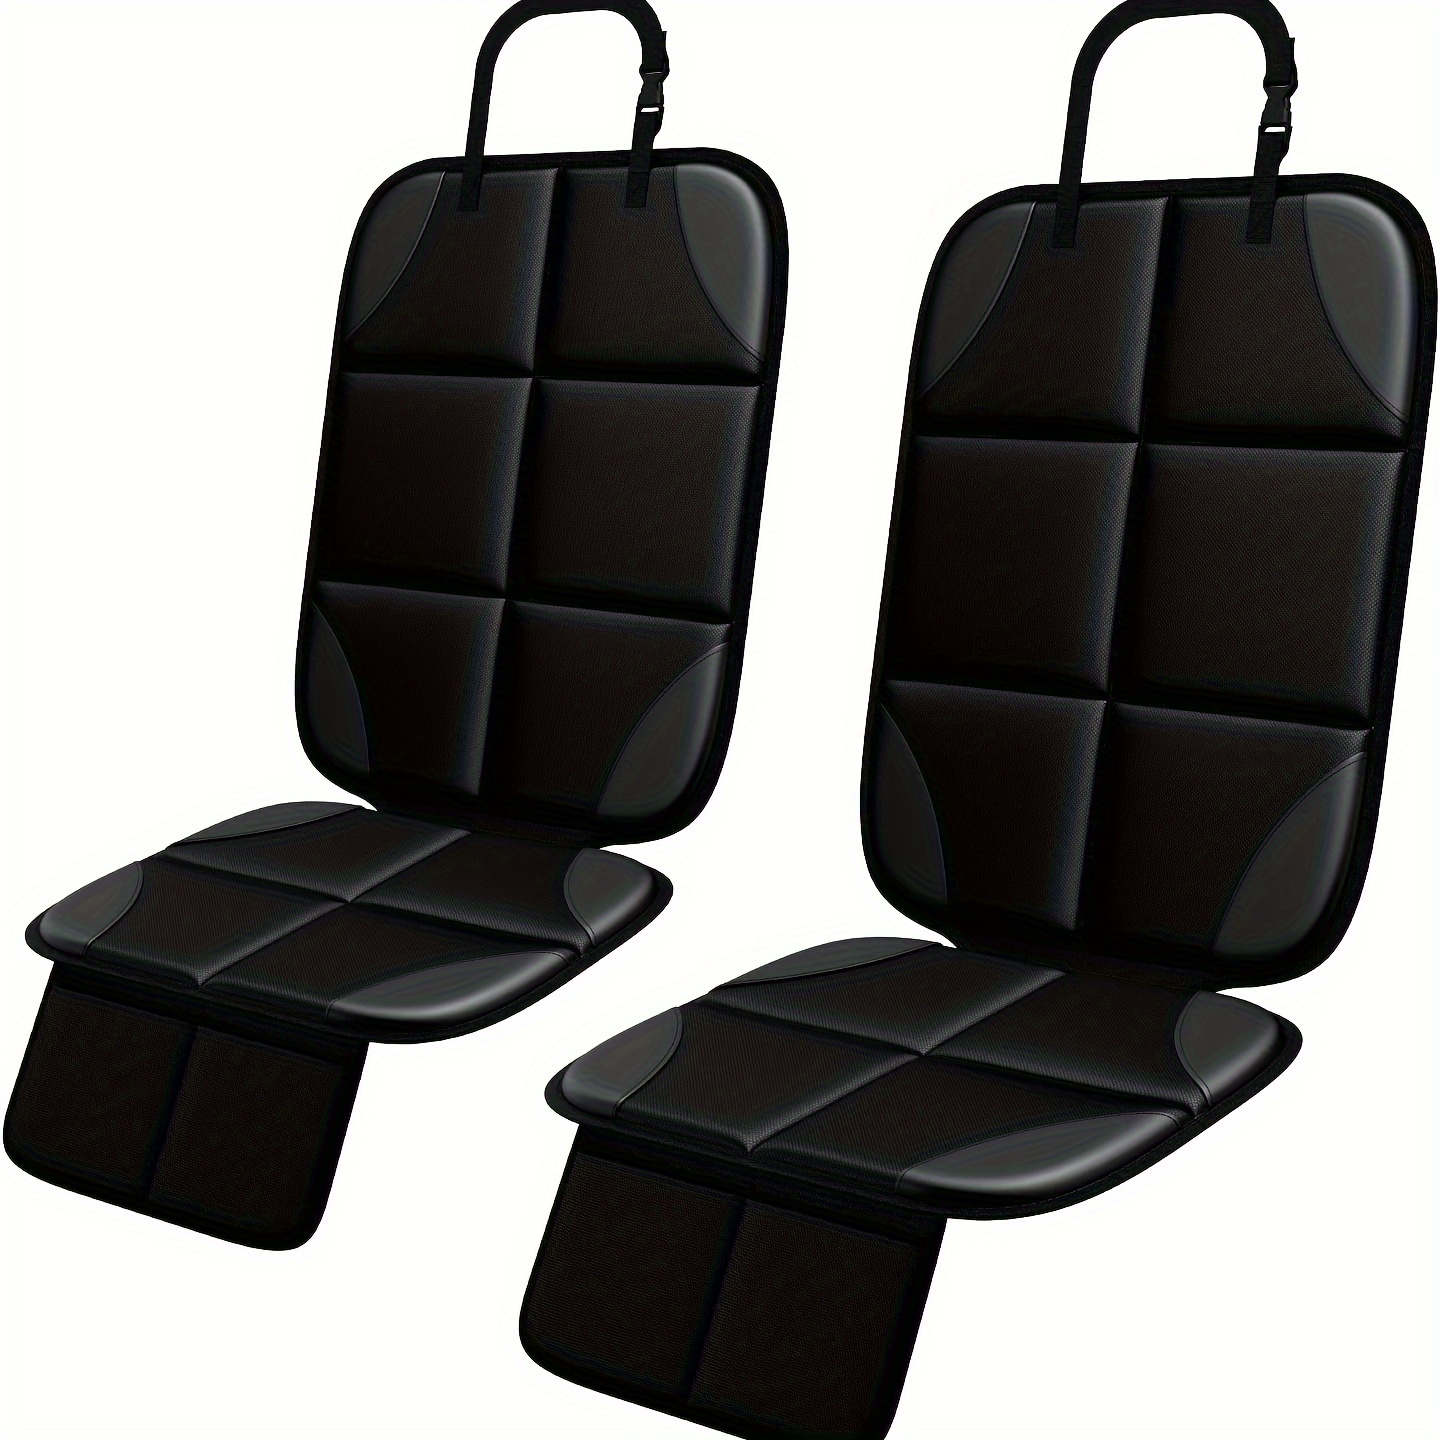 

2pcs Car Seat Protector - Large Car Seat Cushion With Waterproof 600d Fabric And 2 Storage Pockets, Passed Collision Test